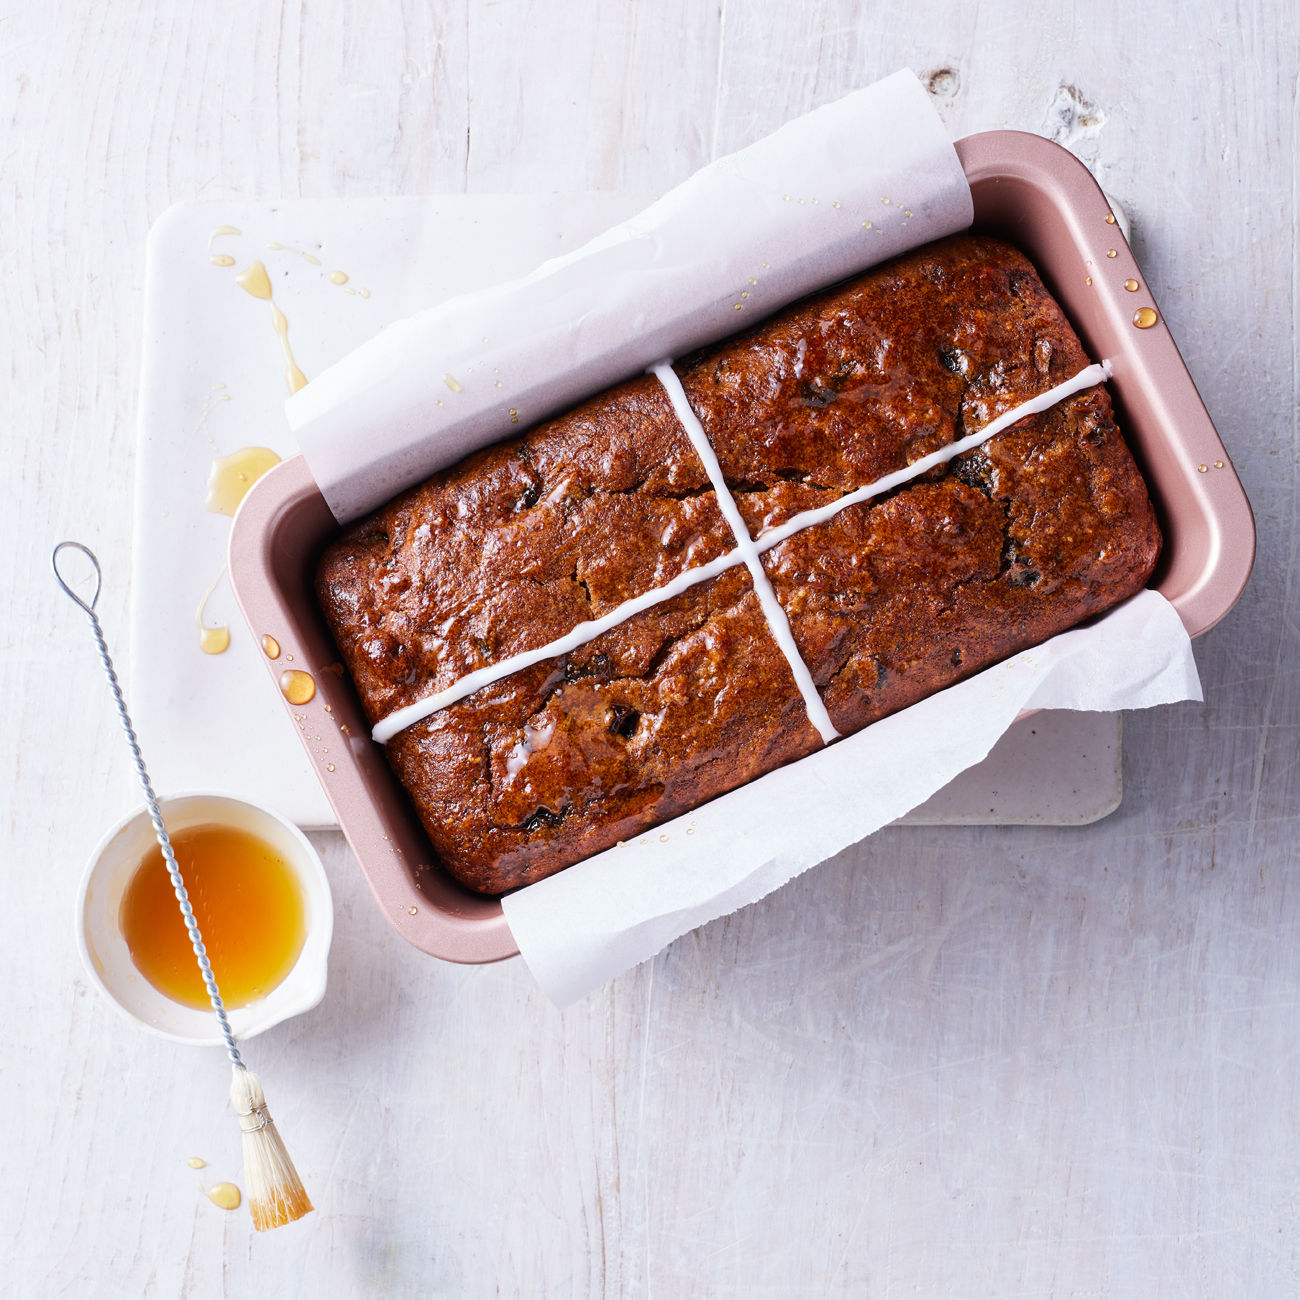 https://foodhub.scene7.com/is/image/woolworthsltdprod/2304-easy-spiced-hot-cross-bun-loaf-cake:Square-1300x1300?wid=1300&hei=1300